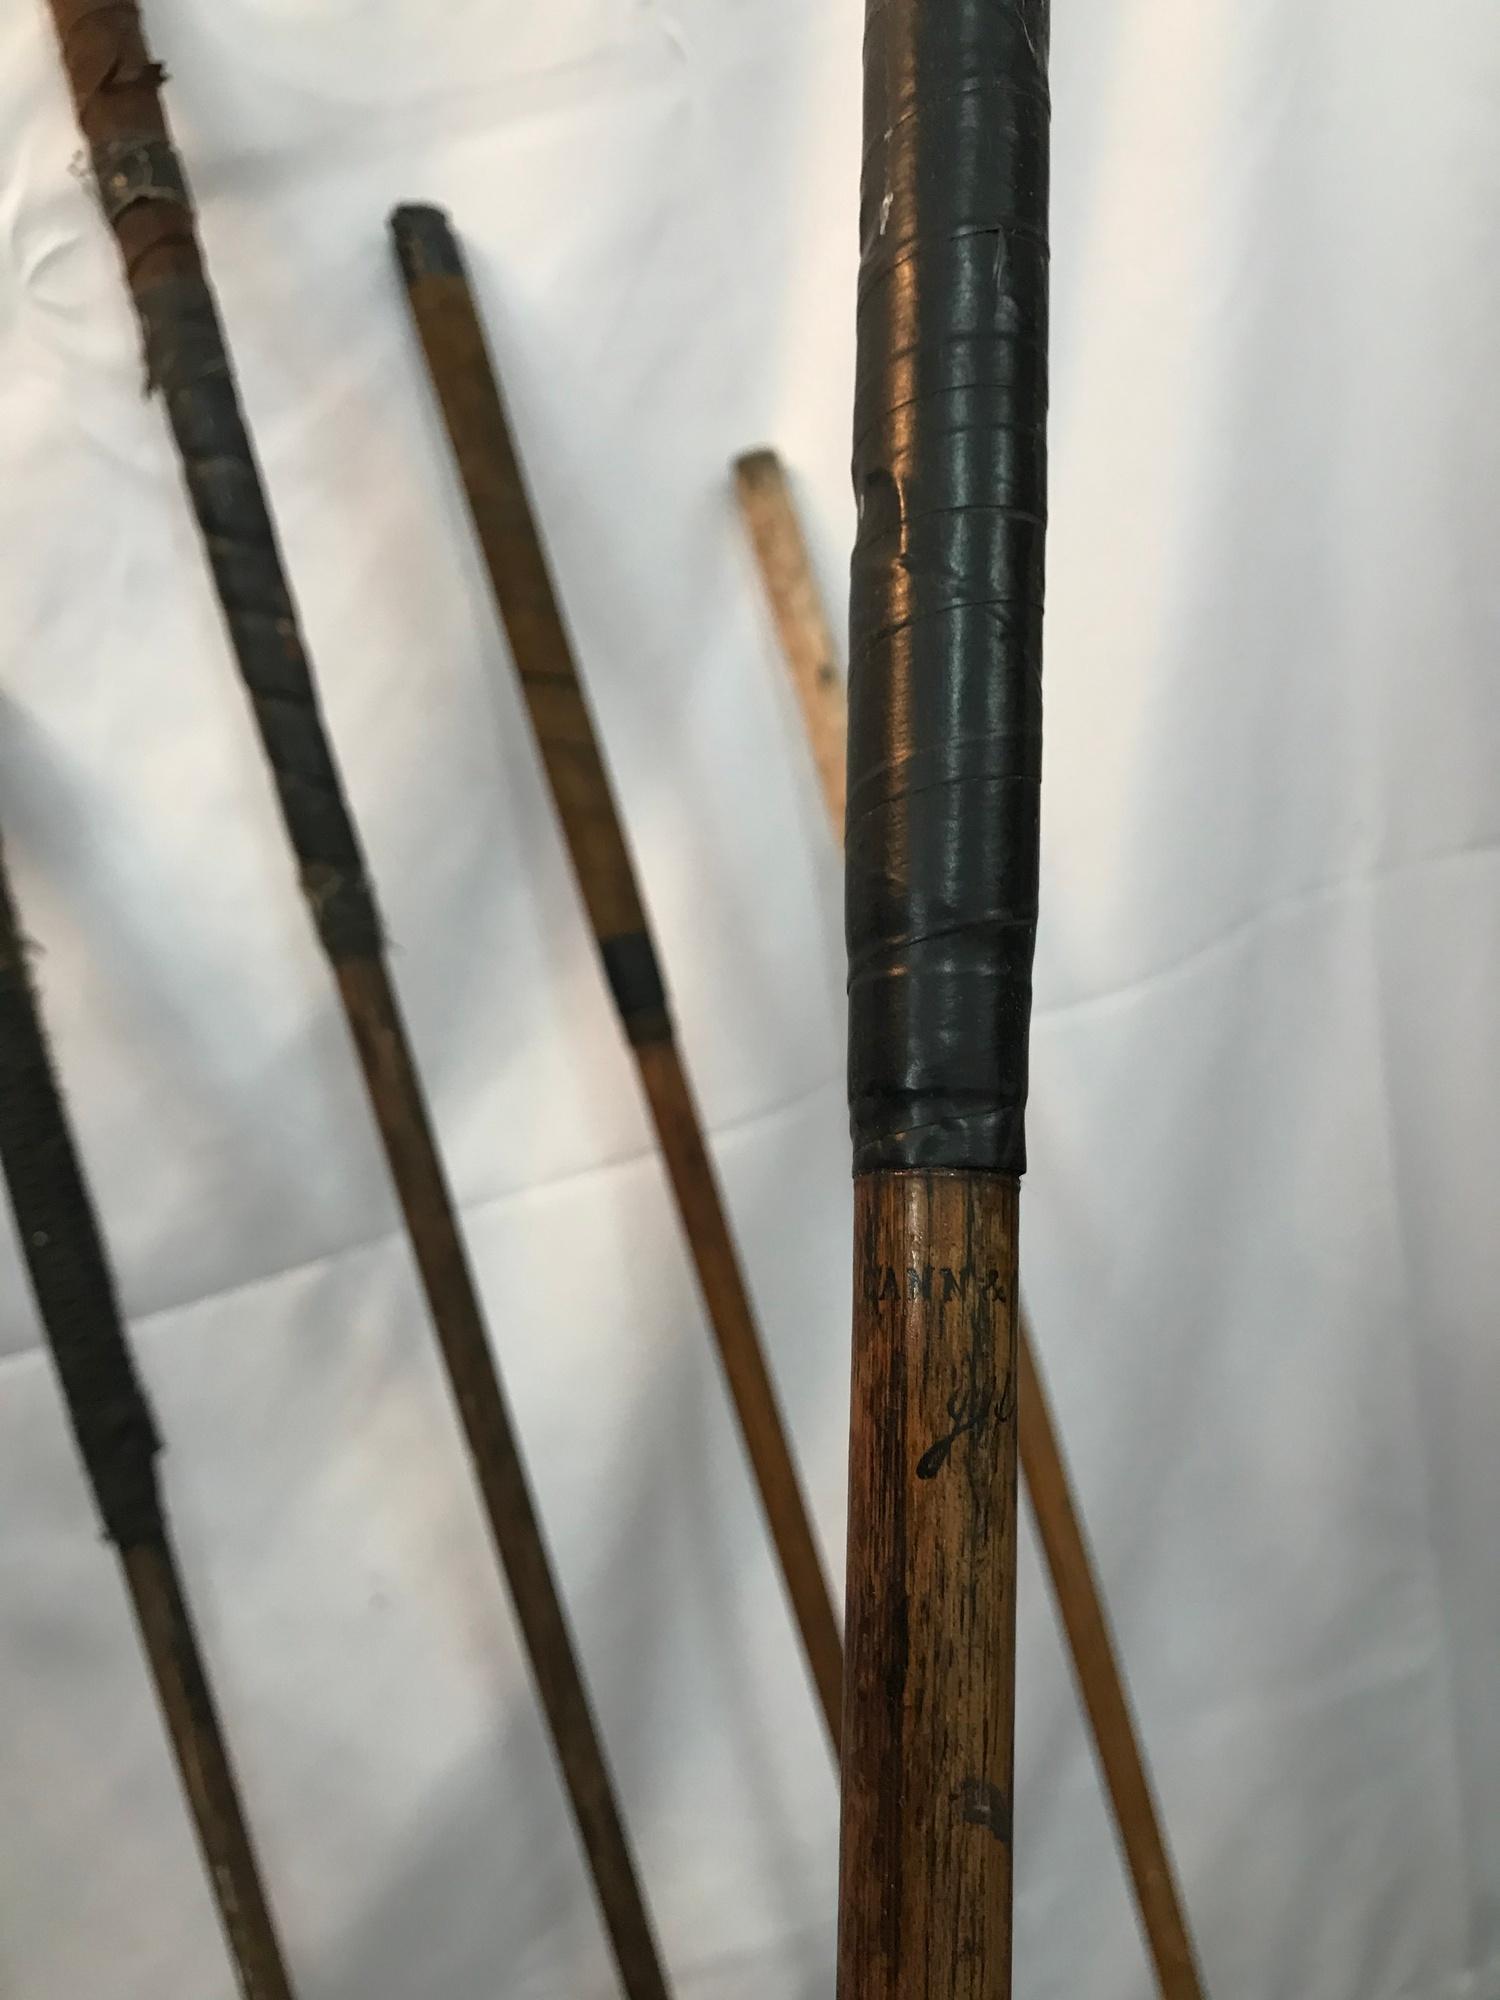 A Large collection of vintage Hickory Shaft golf clubs. Includes makes such as J.G.SMITH, Cann & - Image 14 of 18